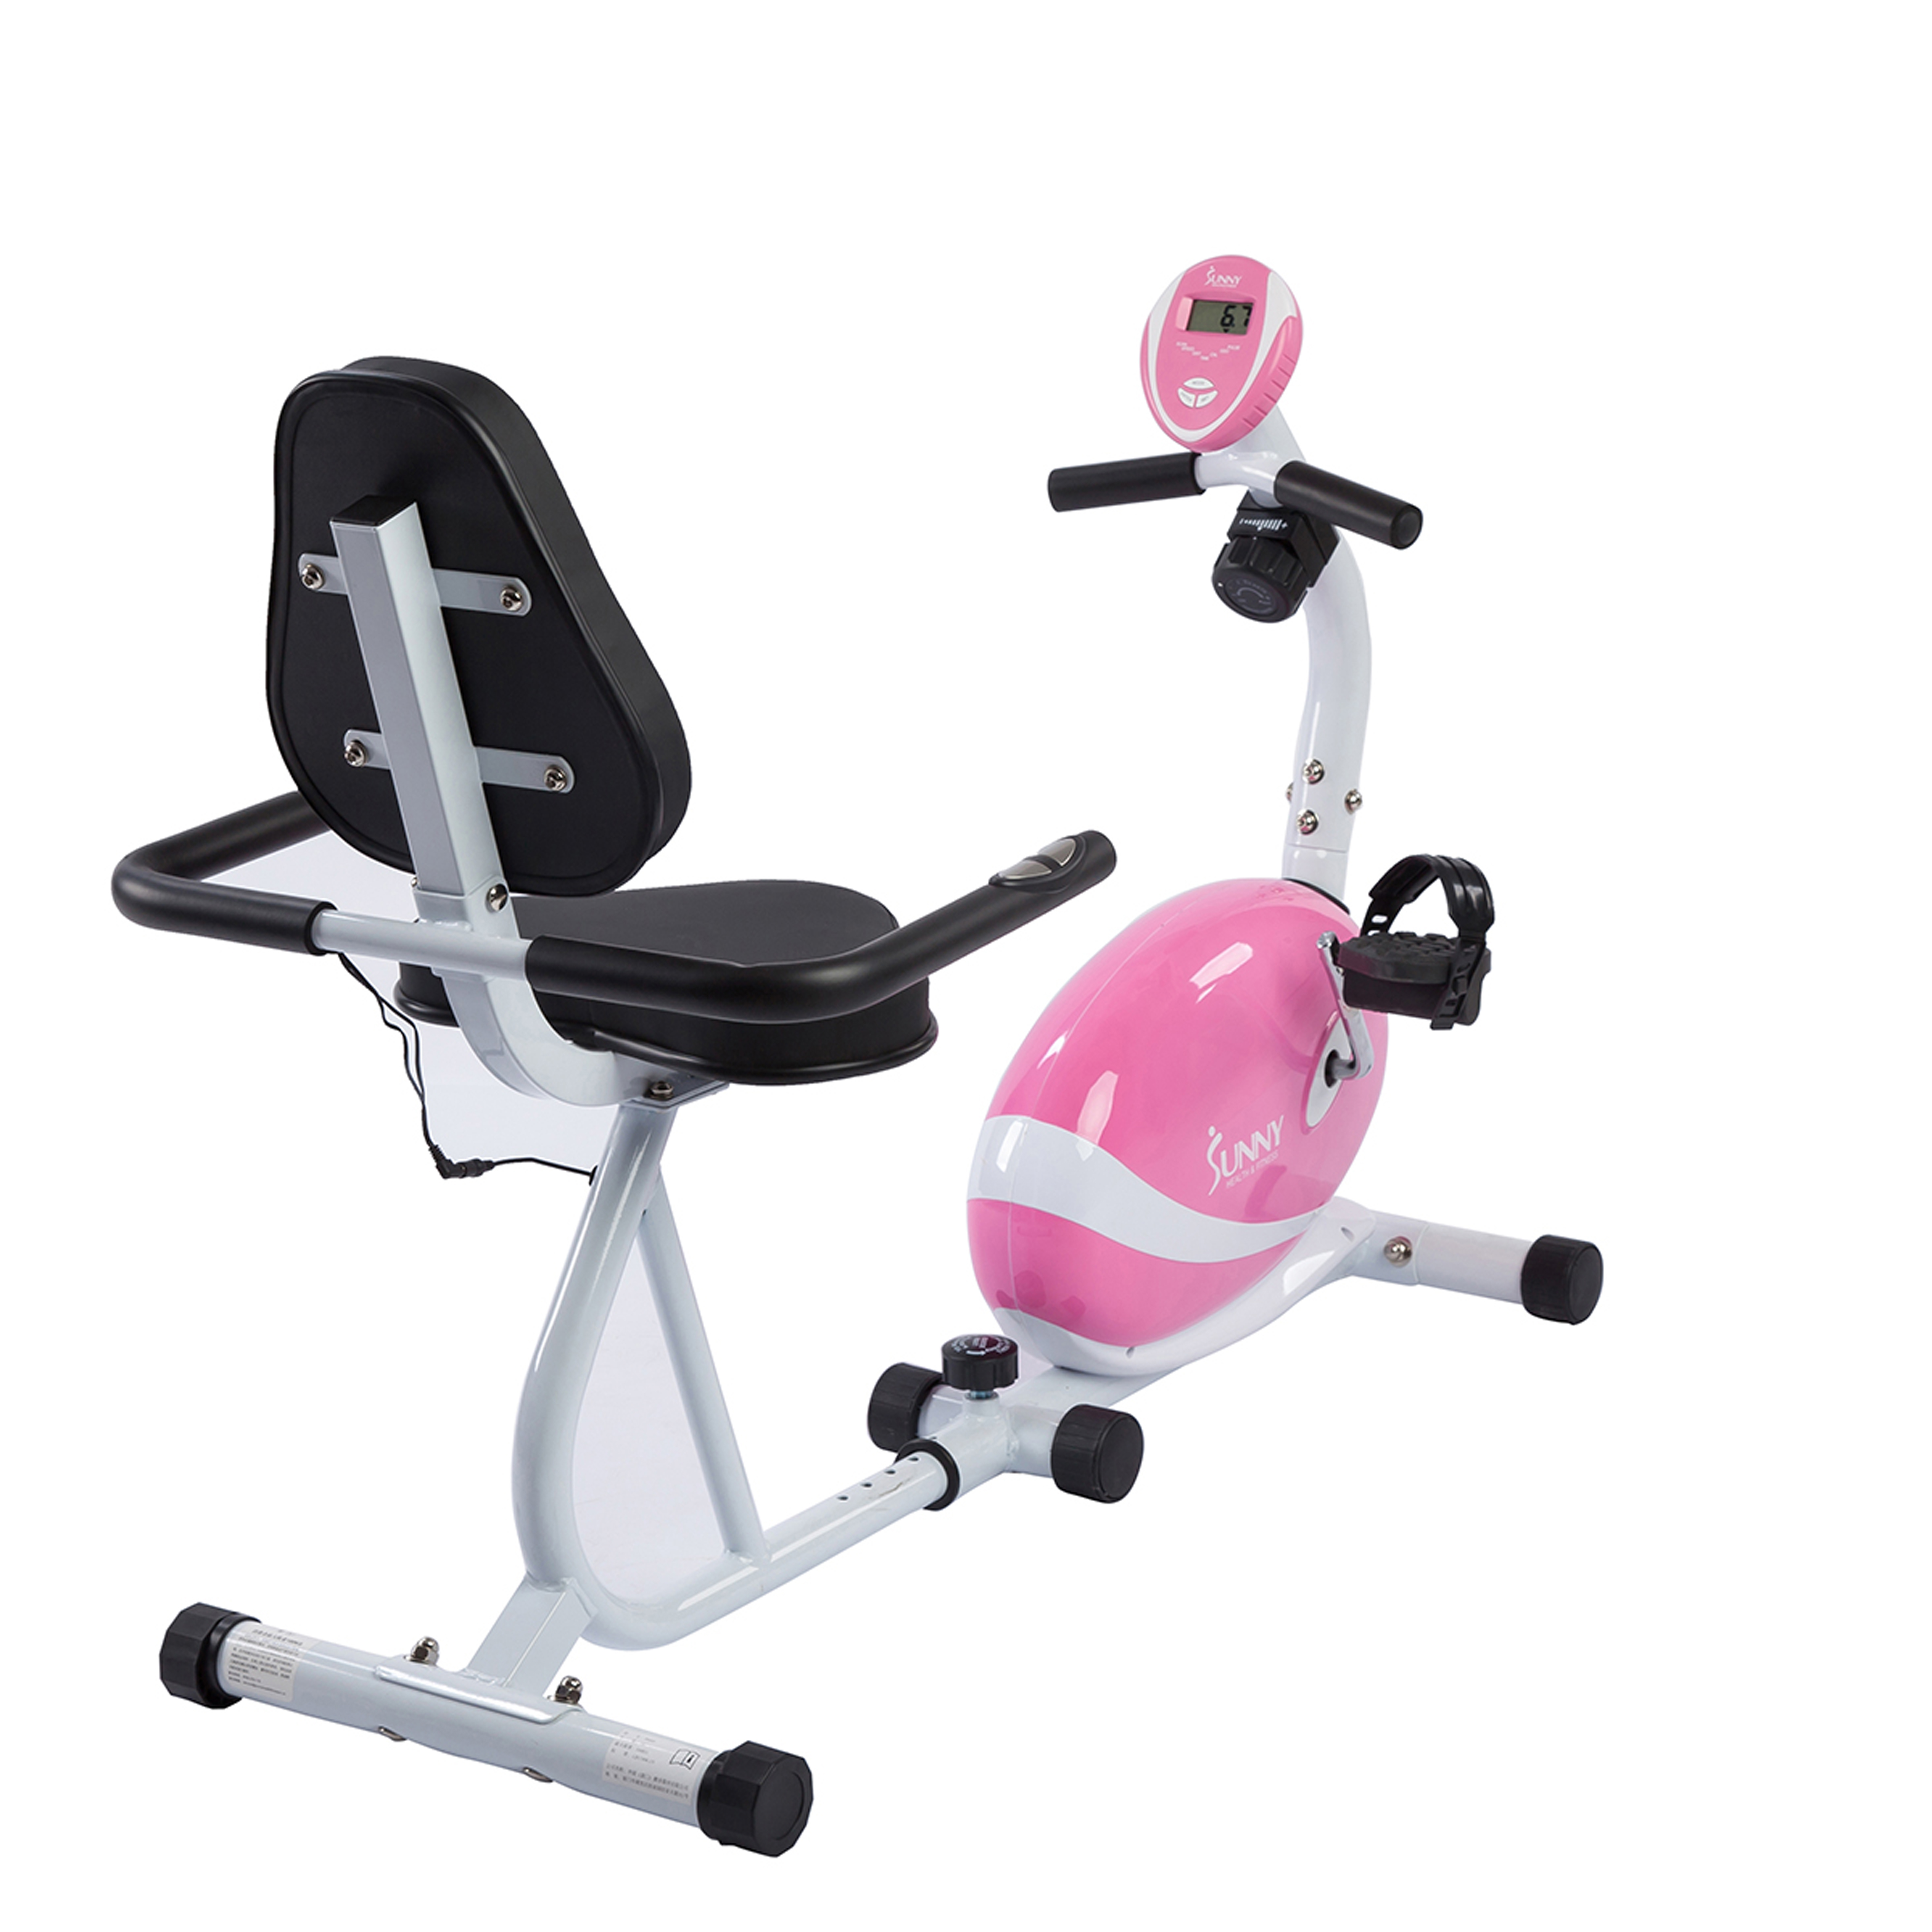 Sunny Health & Fitness Magnetic Stationary Recumbent Exercise Bike, 220 lb Capacity, LCD Monitor, and Pulse Rate Sensor, P8400 - image 9 of 9